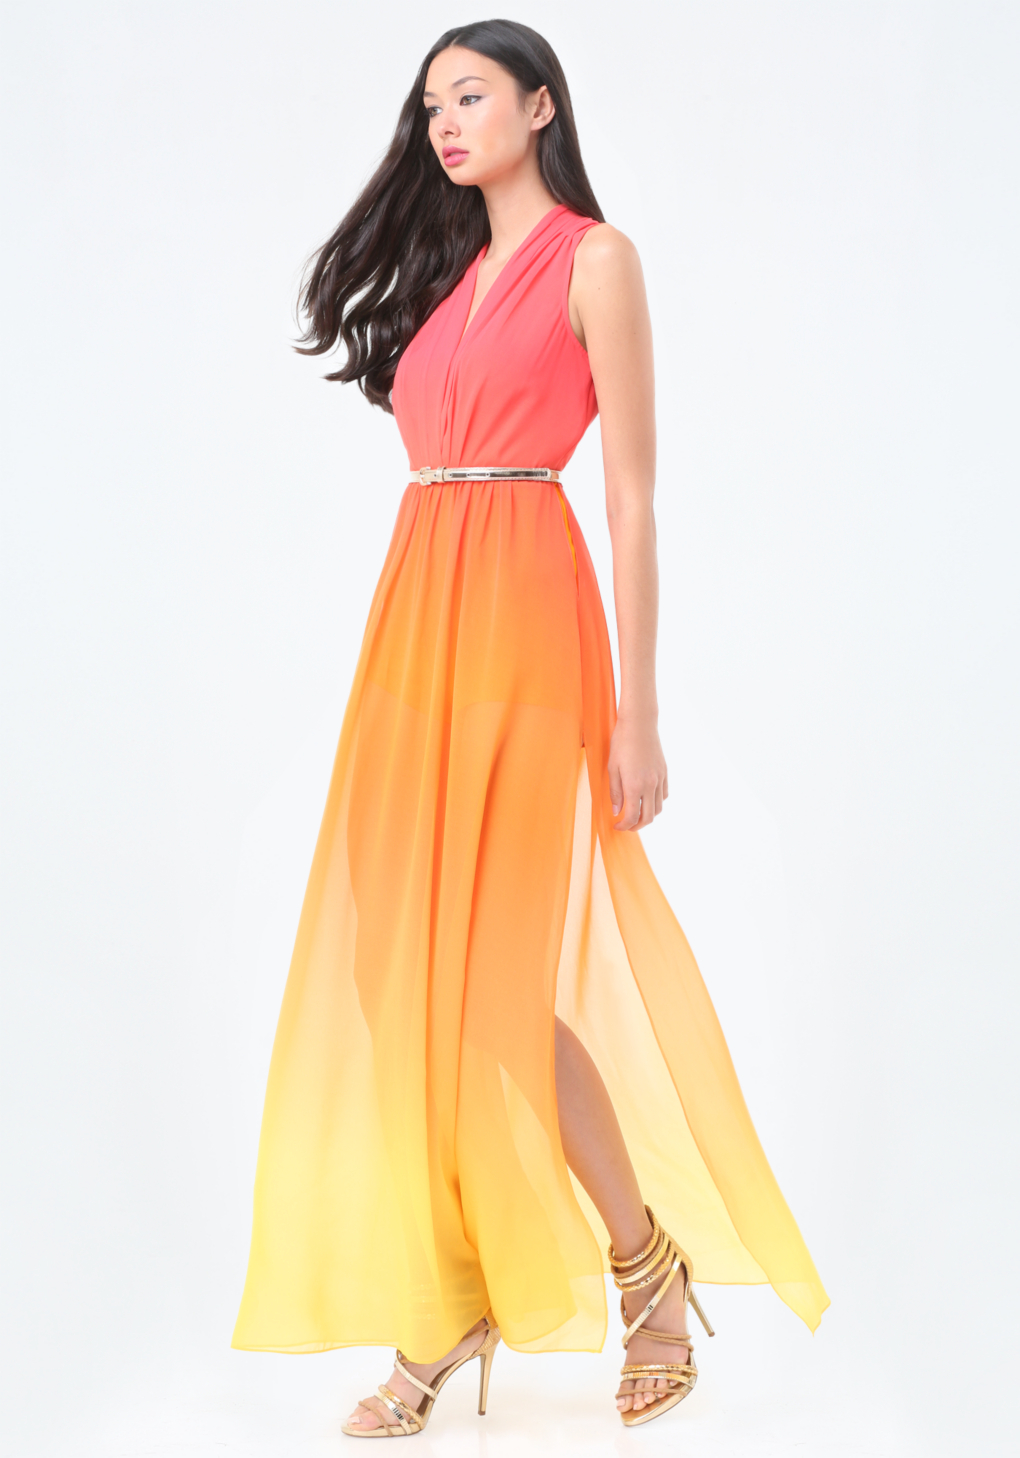 red orange yellow sunset ombre dress